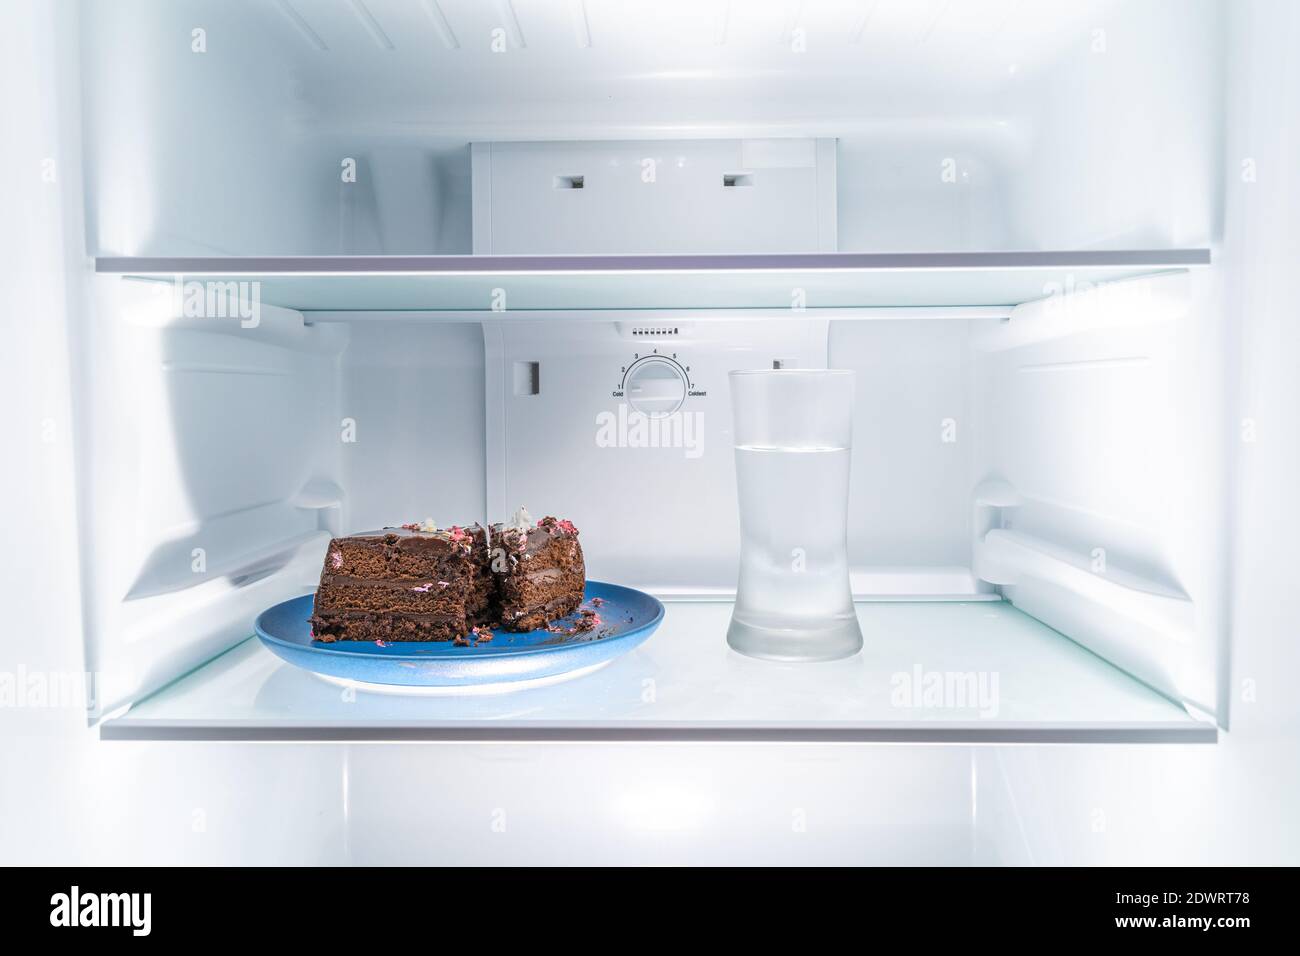 Chocolate cake on a blue plate and a glass of water placed in a clean refridgerator, diet or food concept Stock Photo